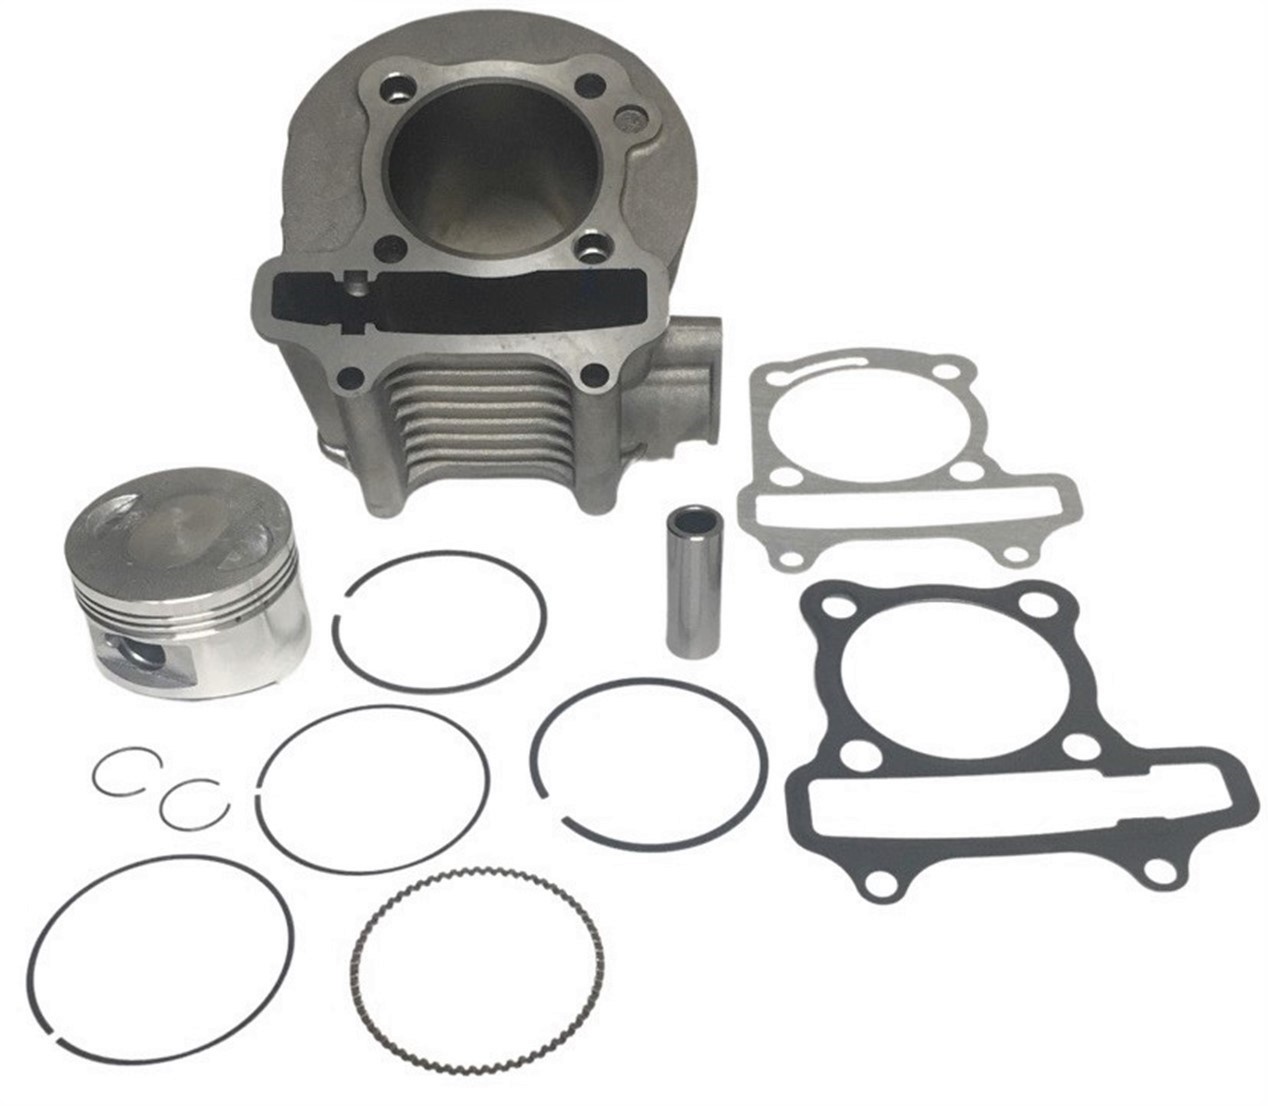 Cylinder Piston Top End Kit Fits GY6-150 ATVs, GoKarts, Scooters, UTVs TYPE 1 Bolt Pattern B=57 H=69 - Click Image to Close